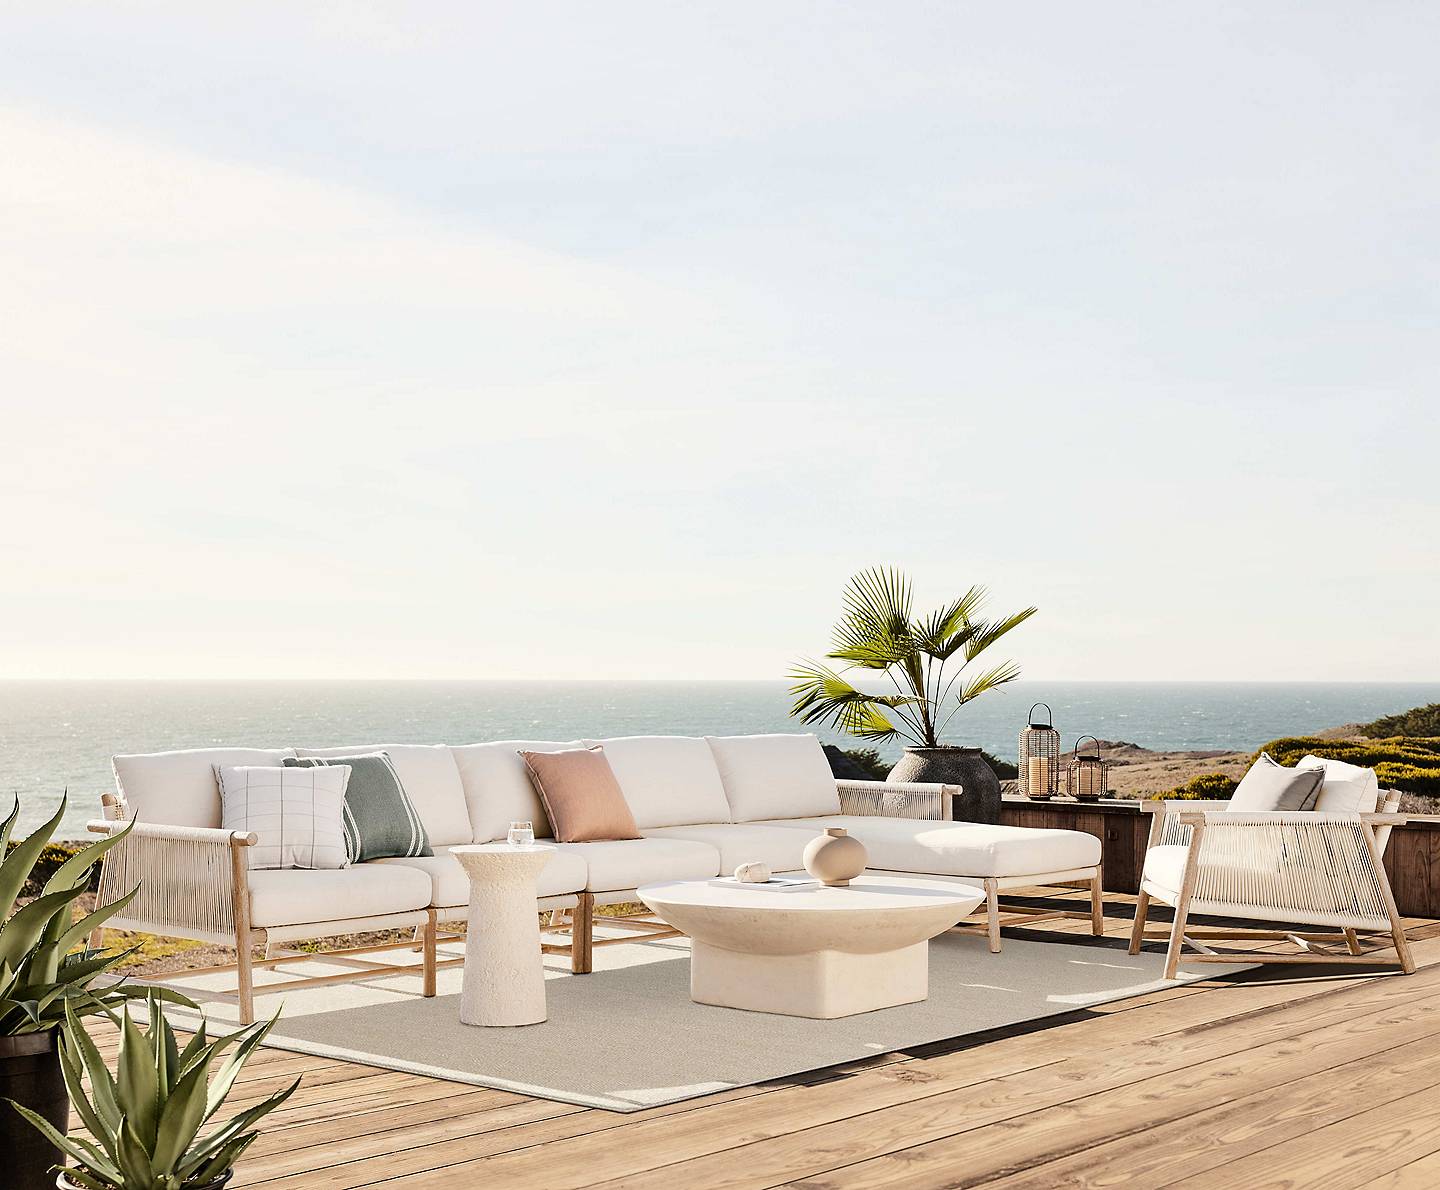 Inspiration - How to Choose the Right Outdoor Furniture Upholstery Fabric